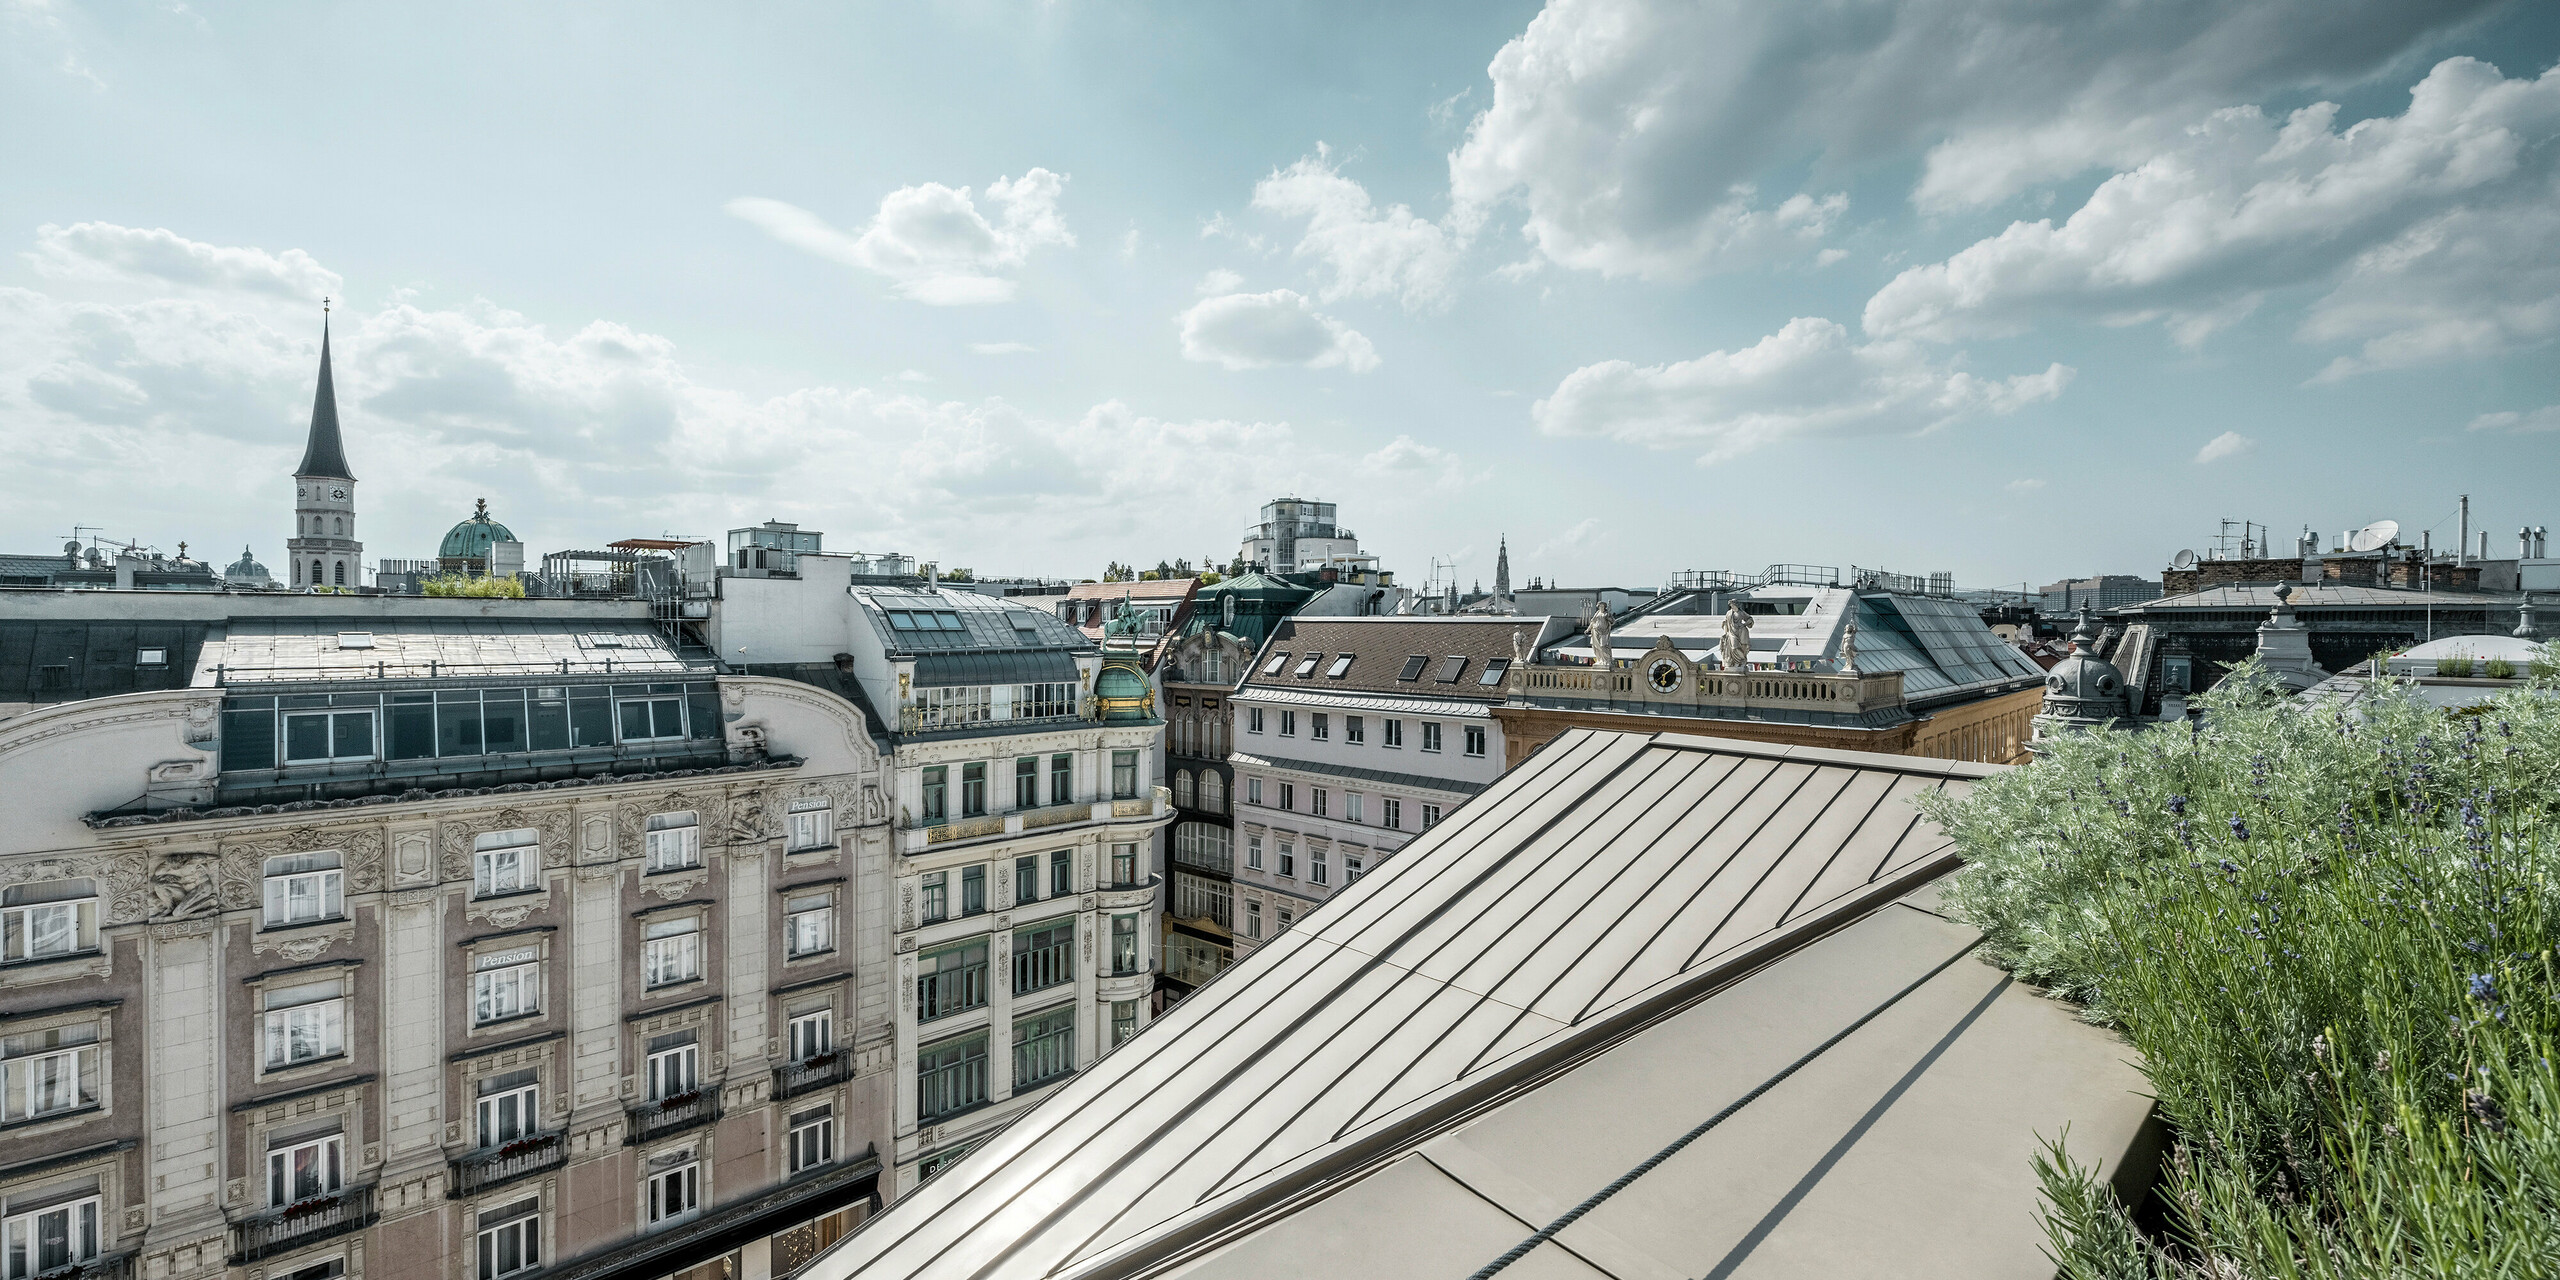 A sweeping view of the roofs of Vienna, in the right of the picture Prefalz sheets, right next to them greenery.